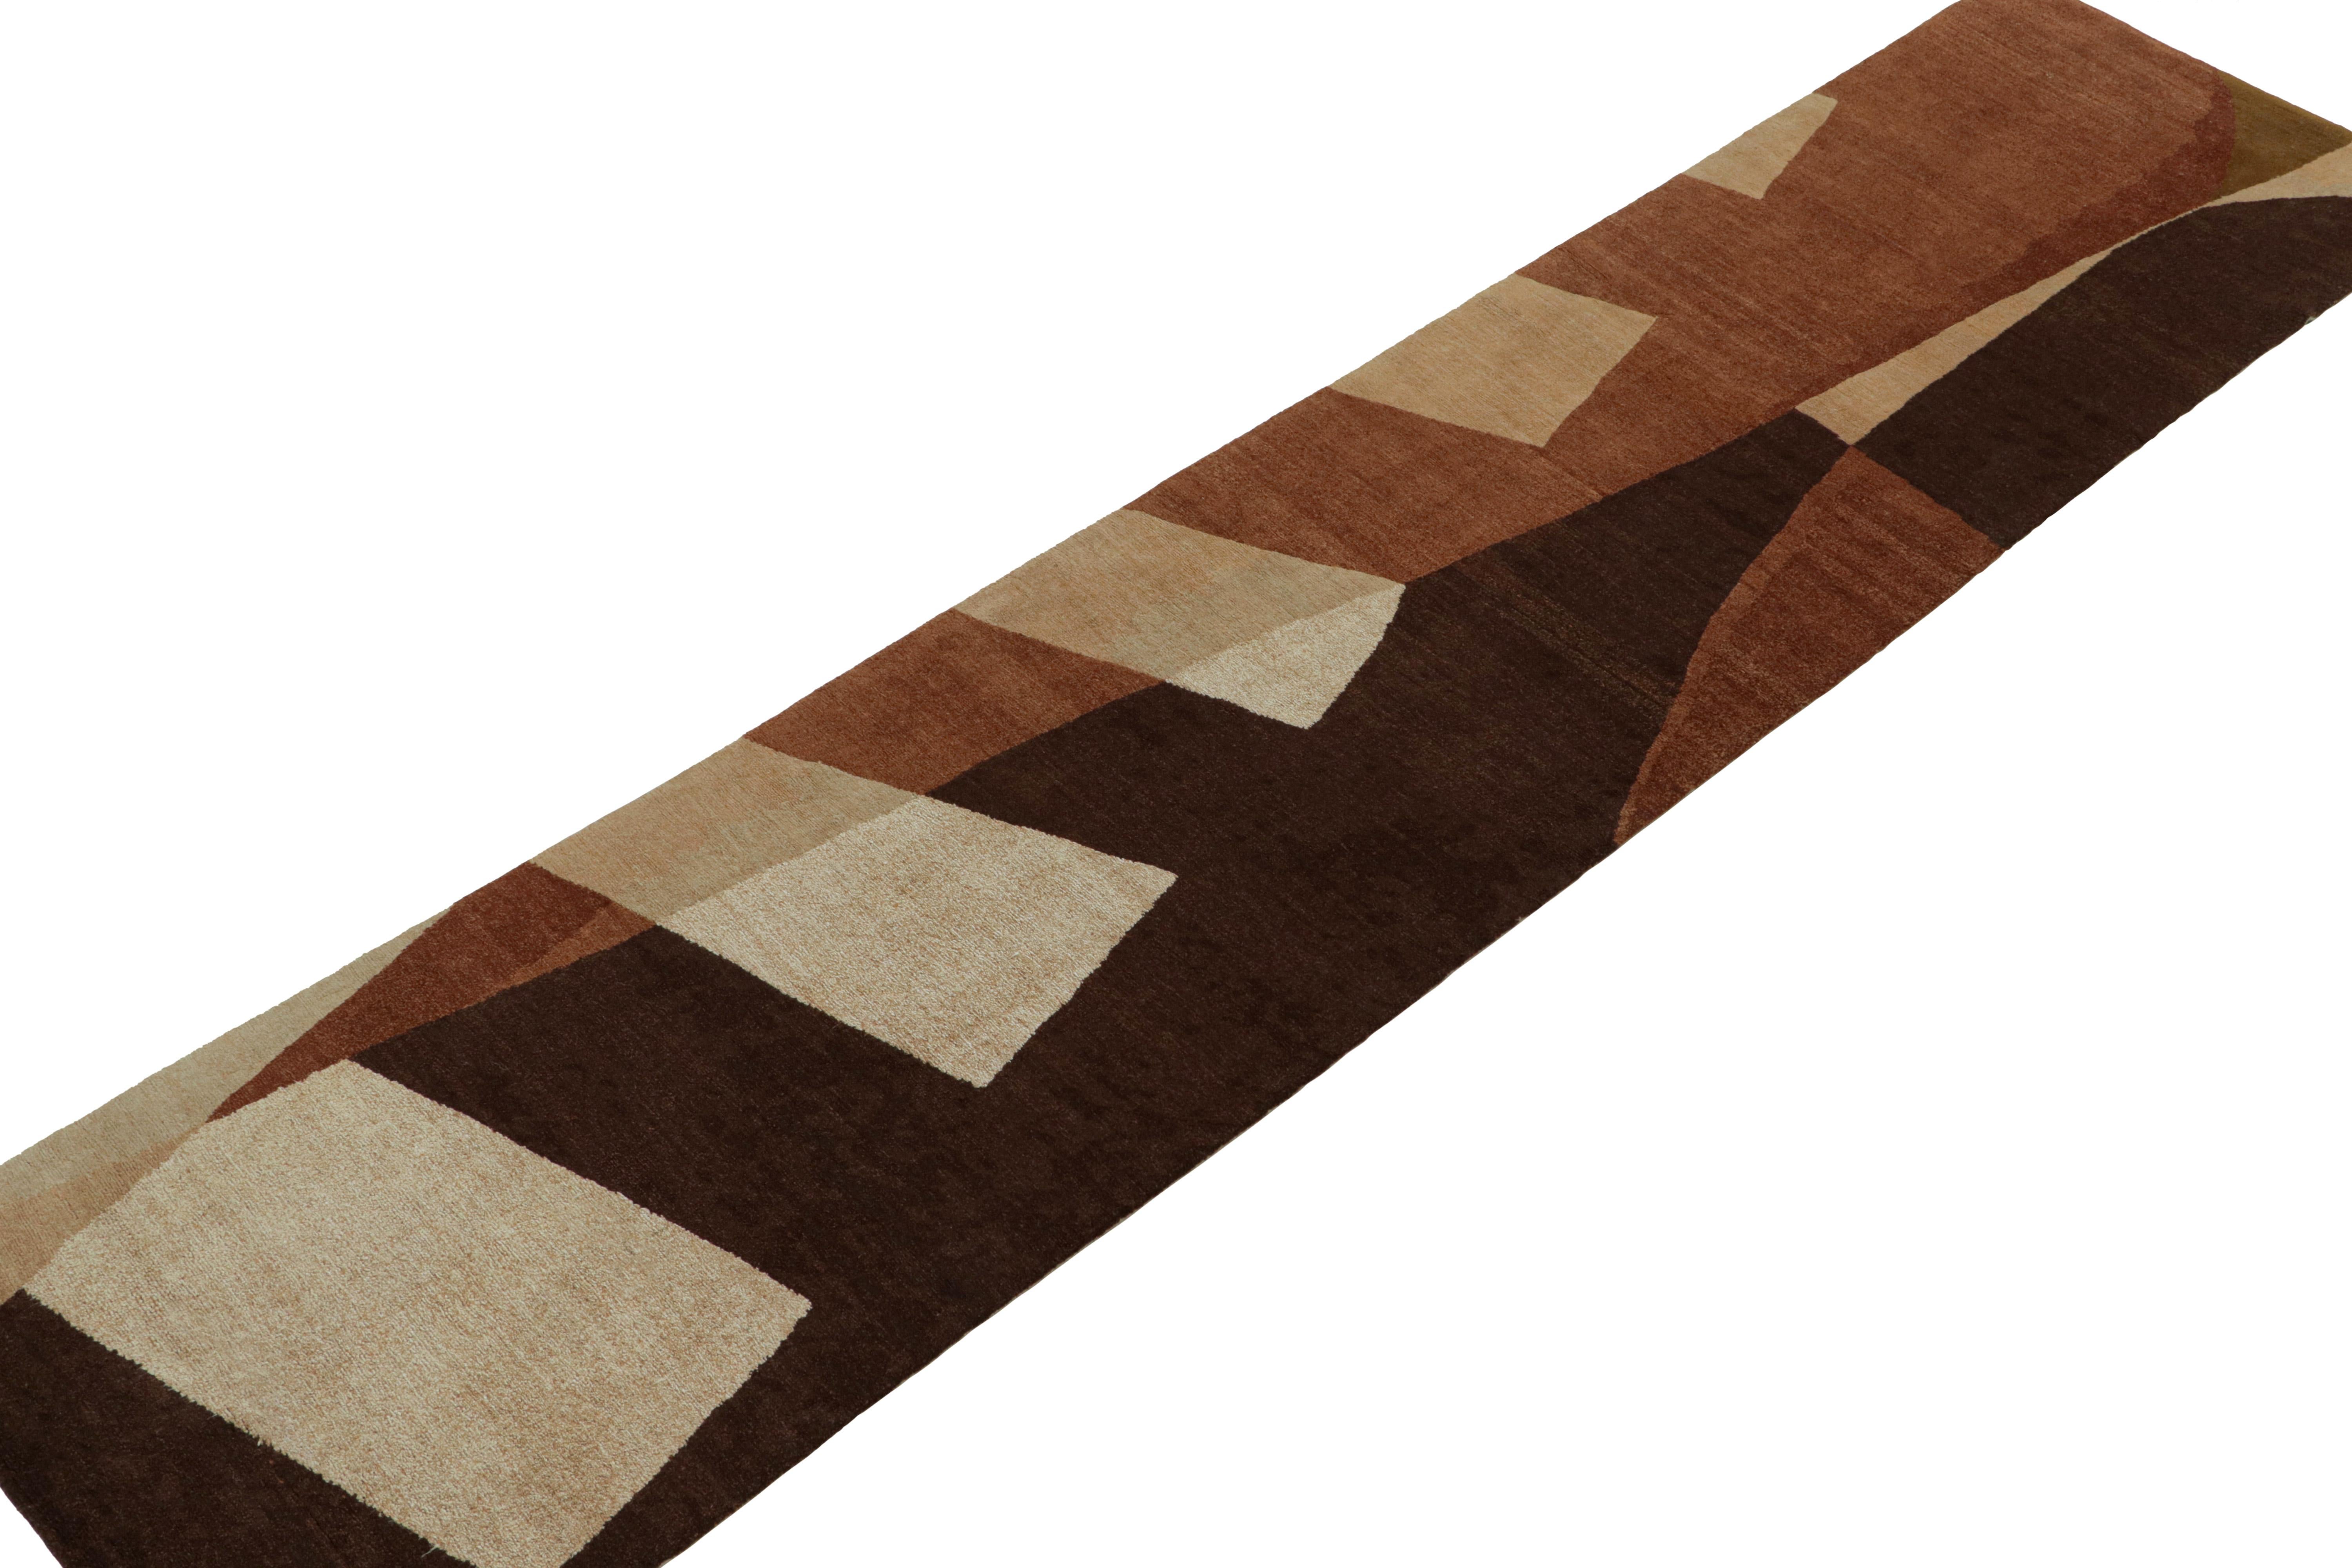 From Rug & Kilim’s Art Deco collection comes this 3x12 contemporary runner. Hand-knotted in wool & silk

On the Design

Inspired by French Deco styles, the design boasts sharp geometric patterns in rich complementary colors of beige & brown.